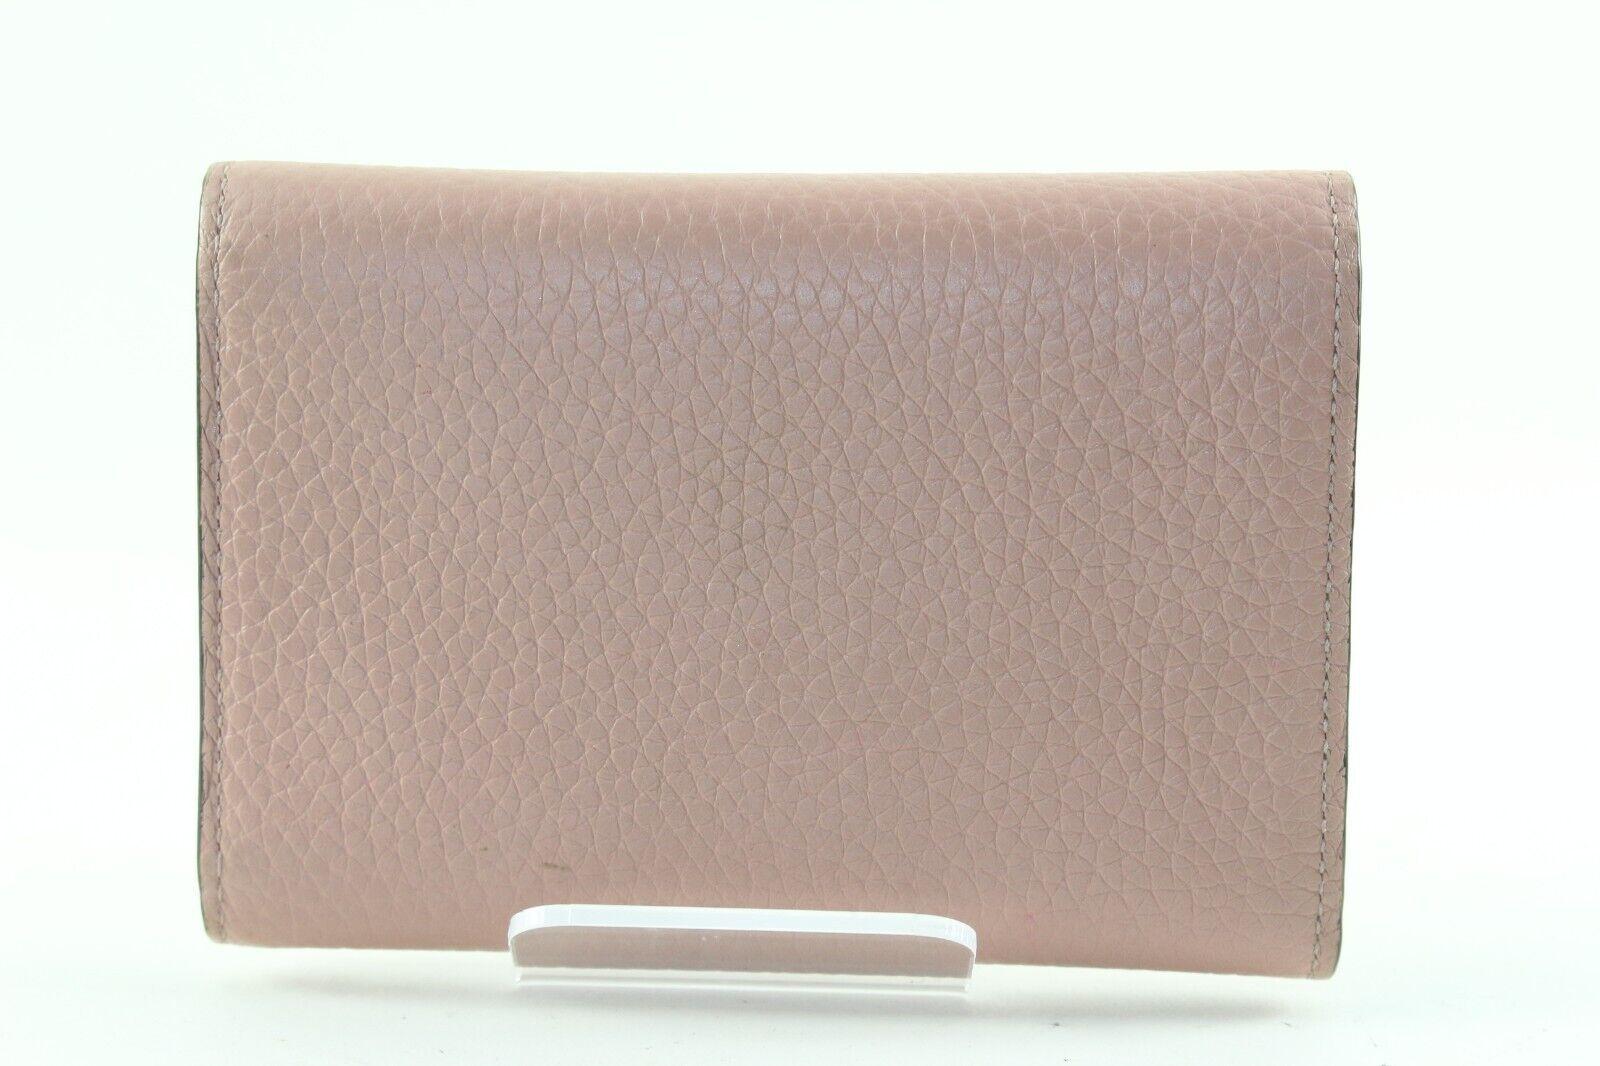 LOUIS VUITTON Blush Pink Taurillong Leather Capucines Wallet 1LV1219K For Sale 7